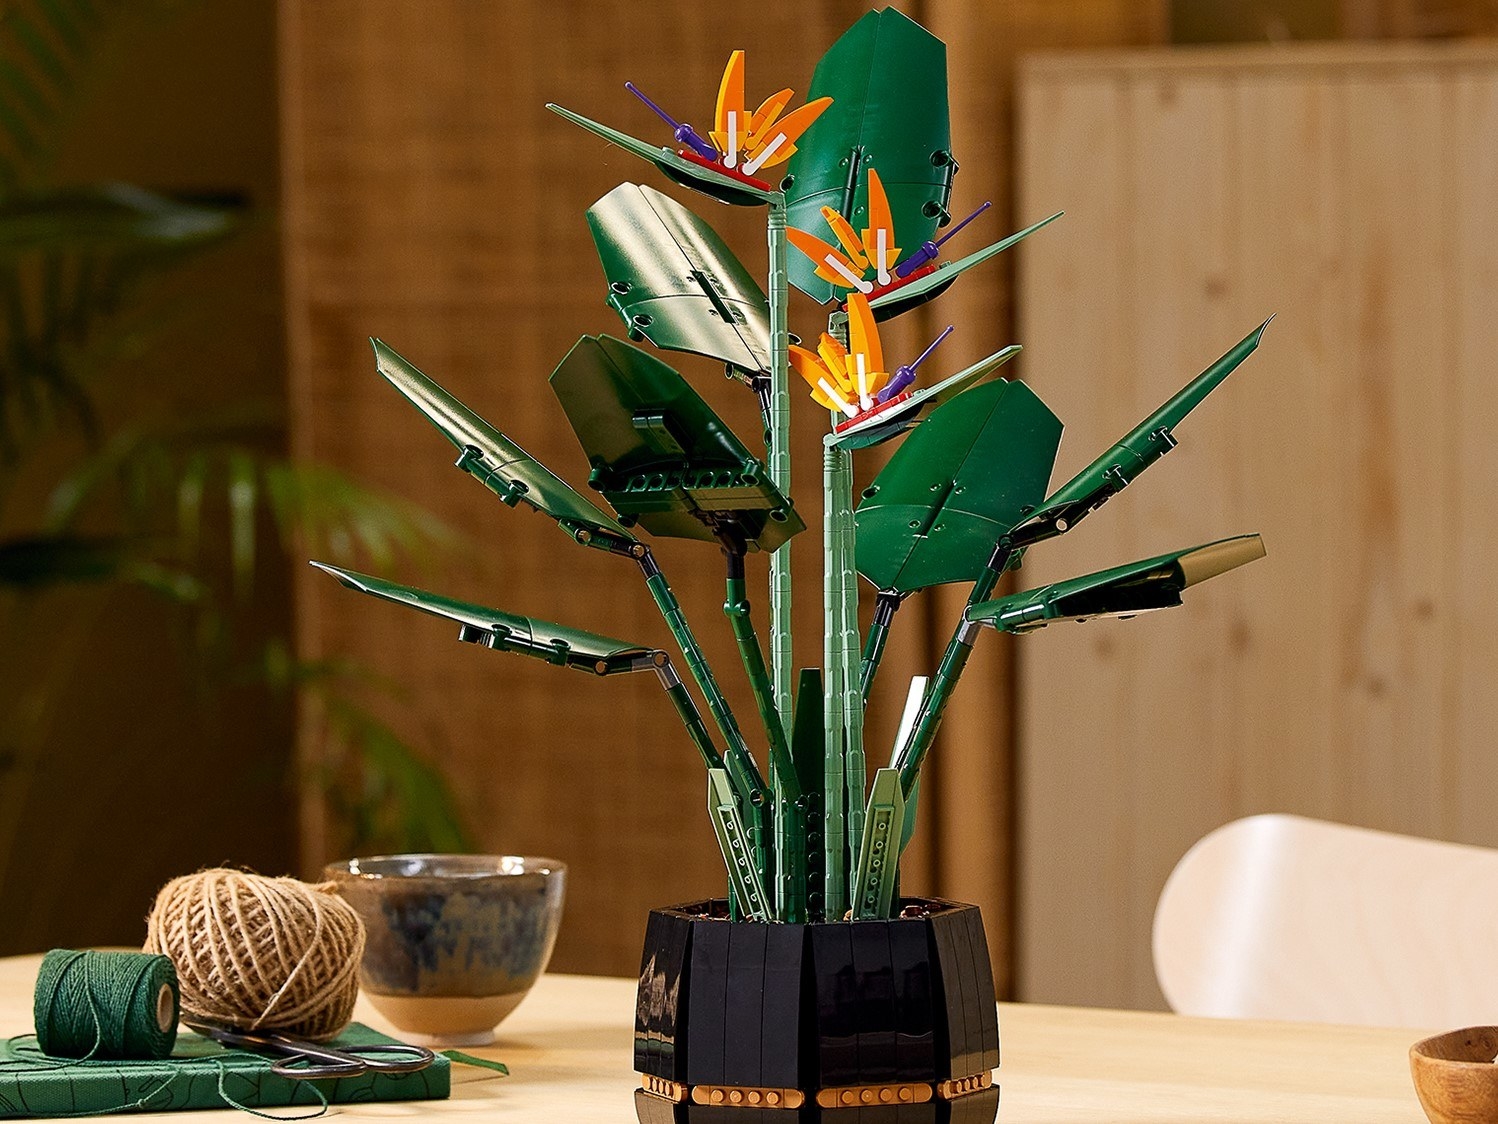 The lego plant on a table